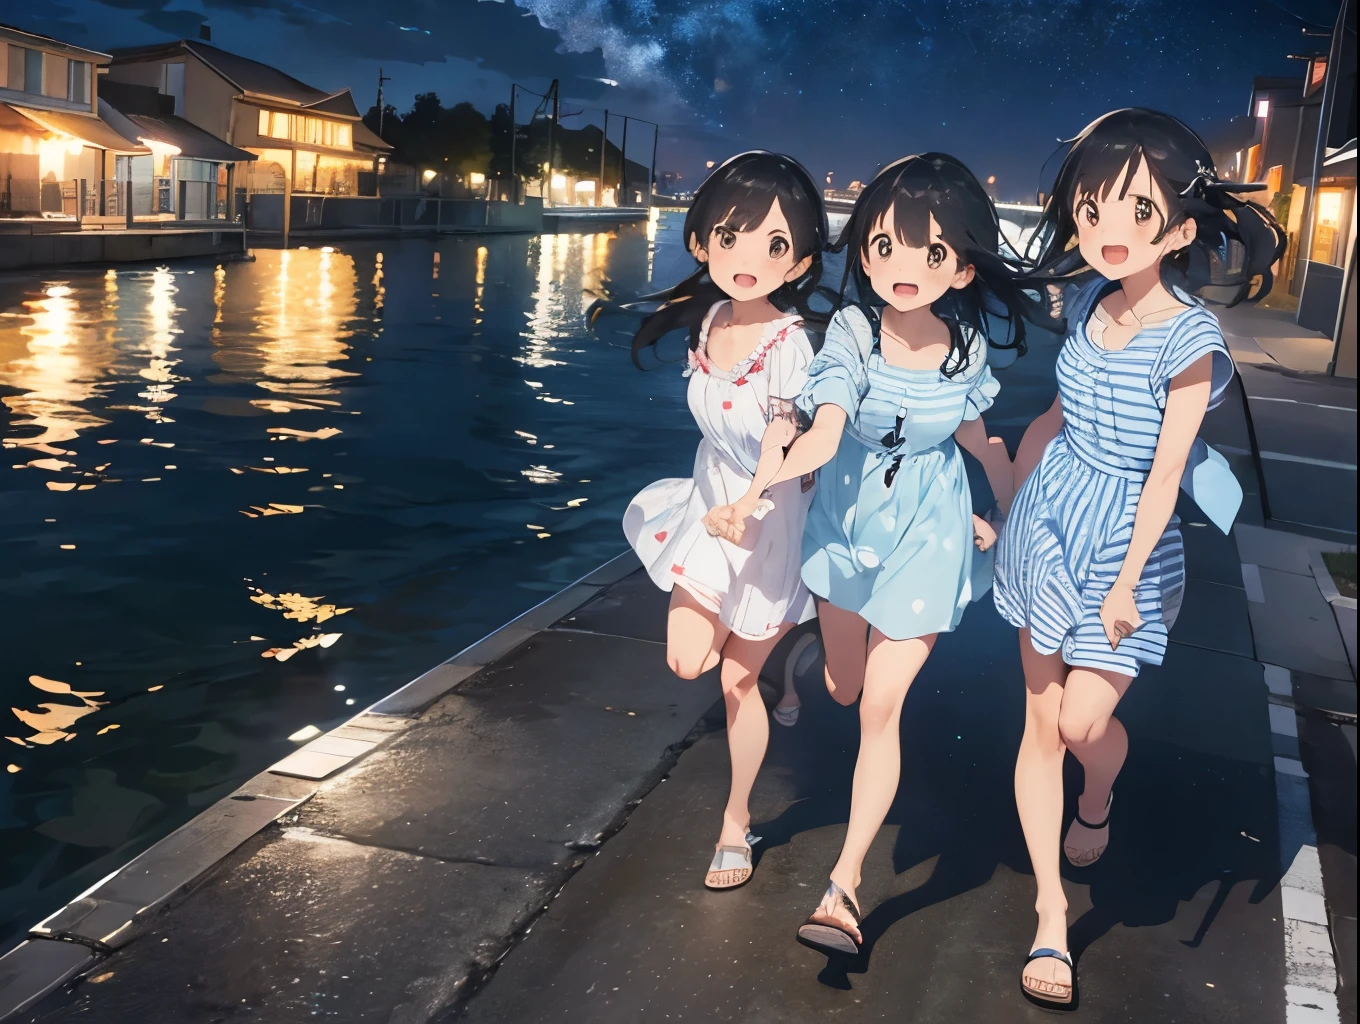 Big Dipper、Night view of the port town and starry sky、Light blue striped shirt dress、Sandals for bare feet、Sisters flipping each other&#39;s skirts、ワンピースがふわりとめくれてCute white underwearが見える、Cute white underwear